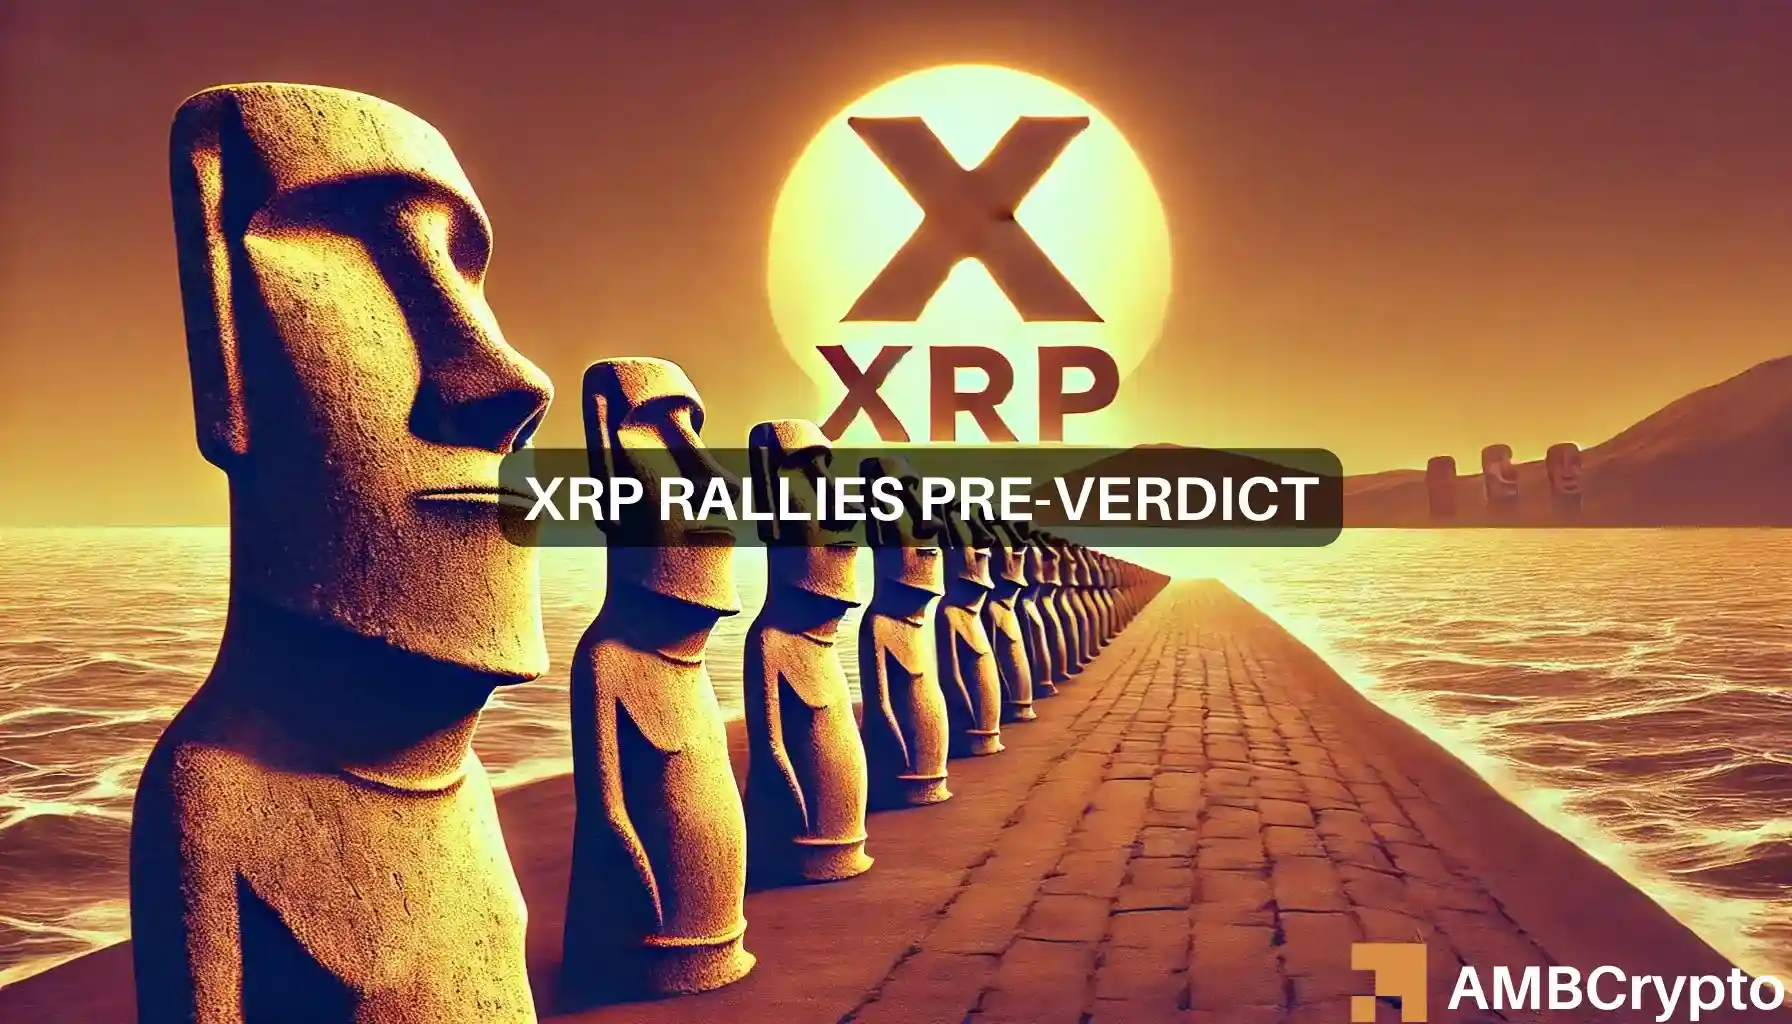 XRP market watch: Buy more or sell now? Key insights here!